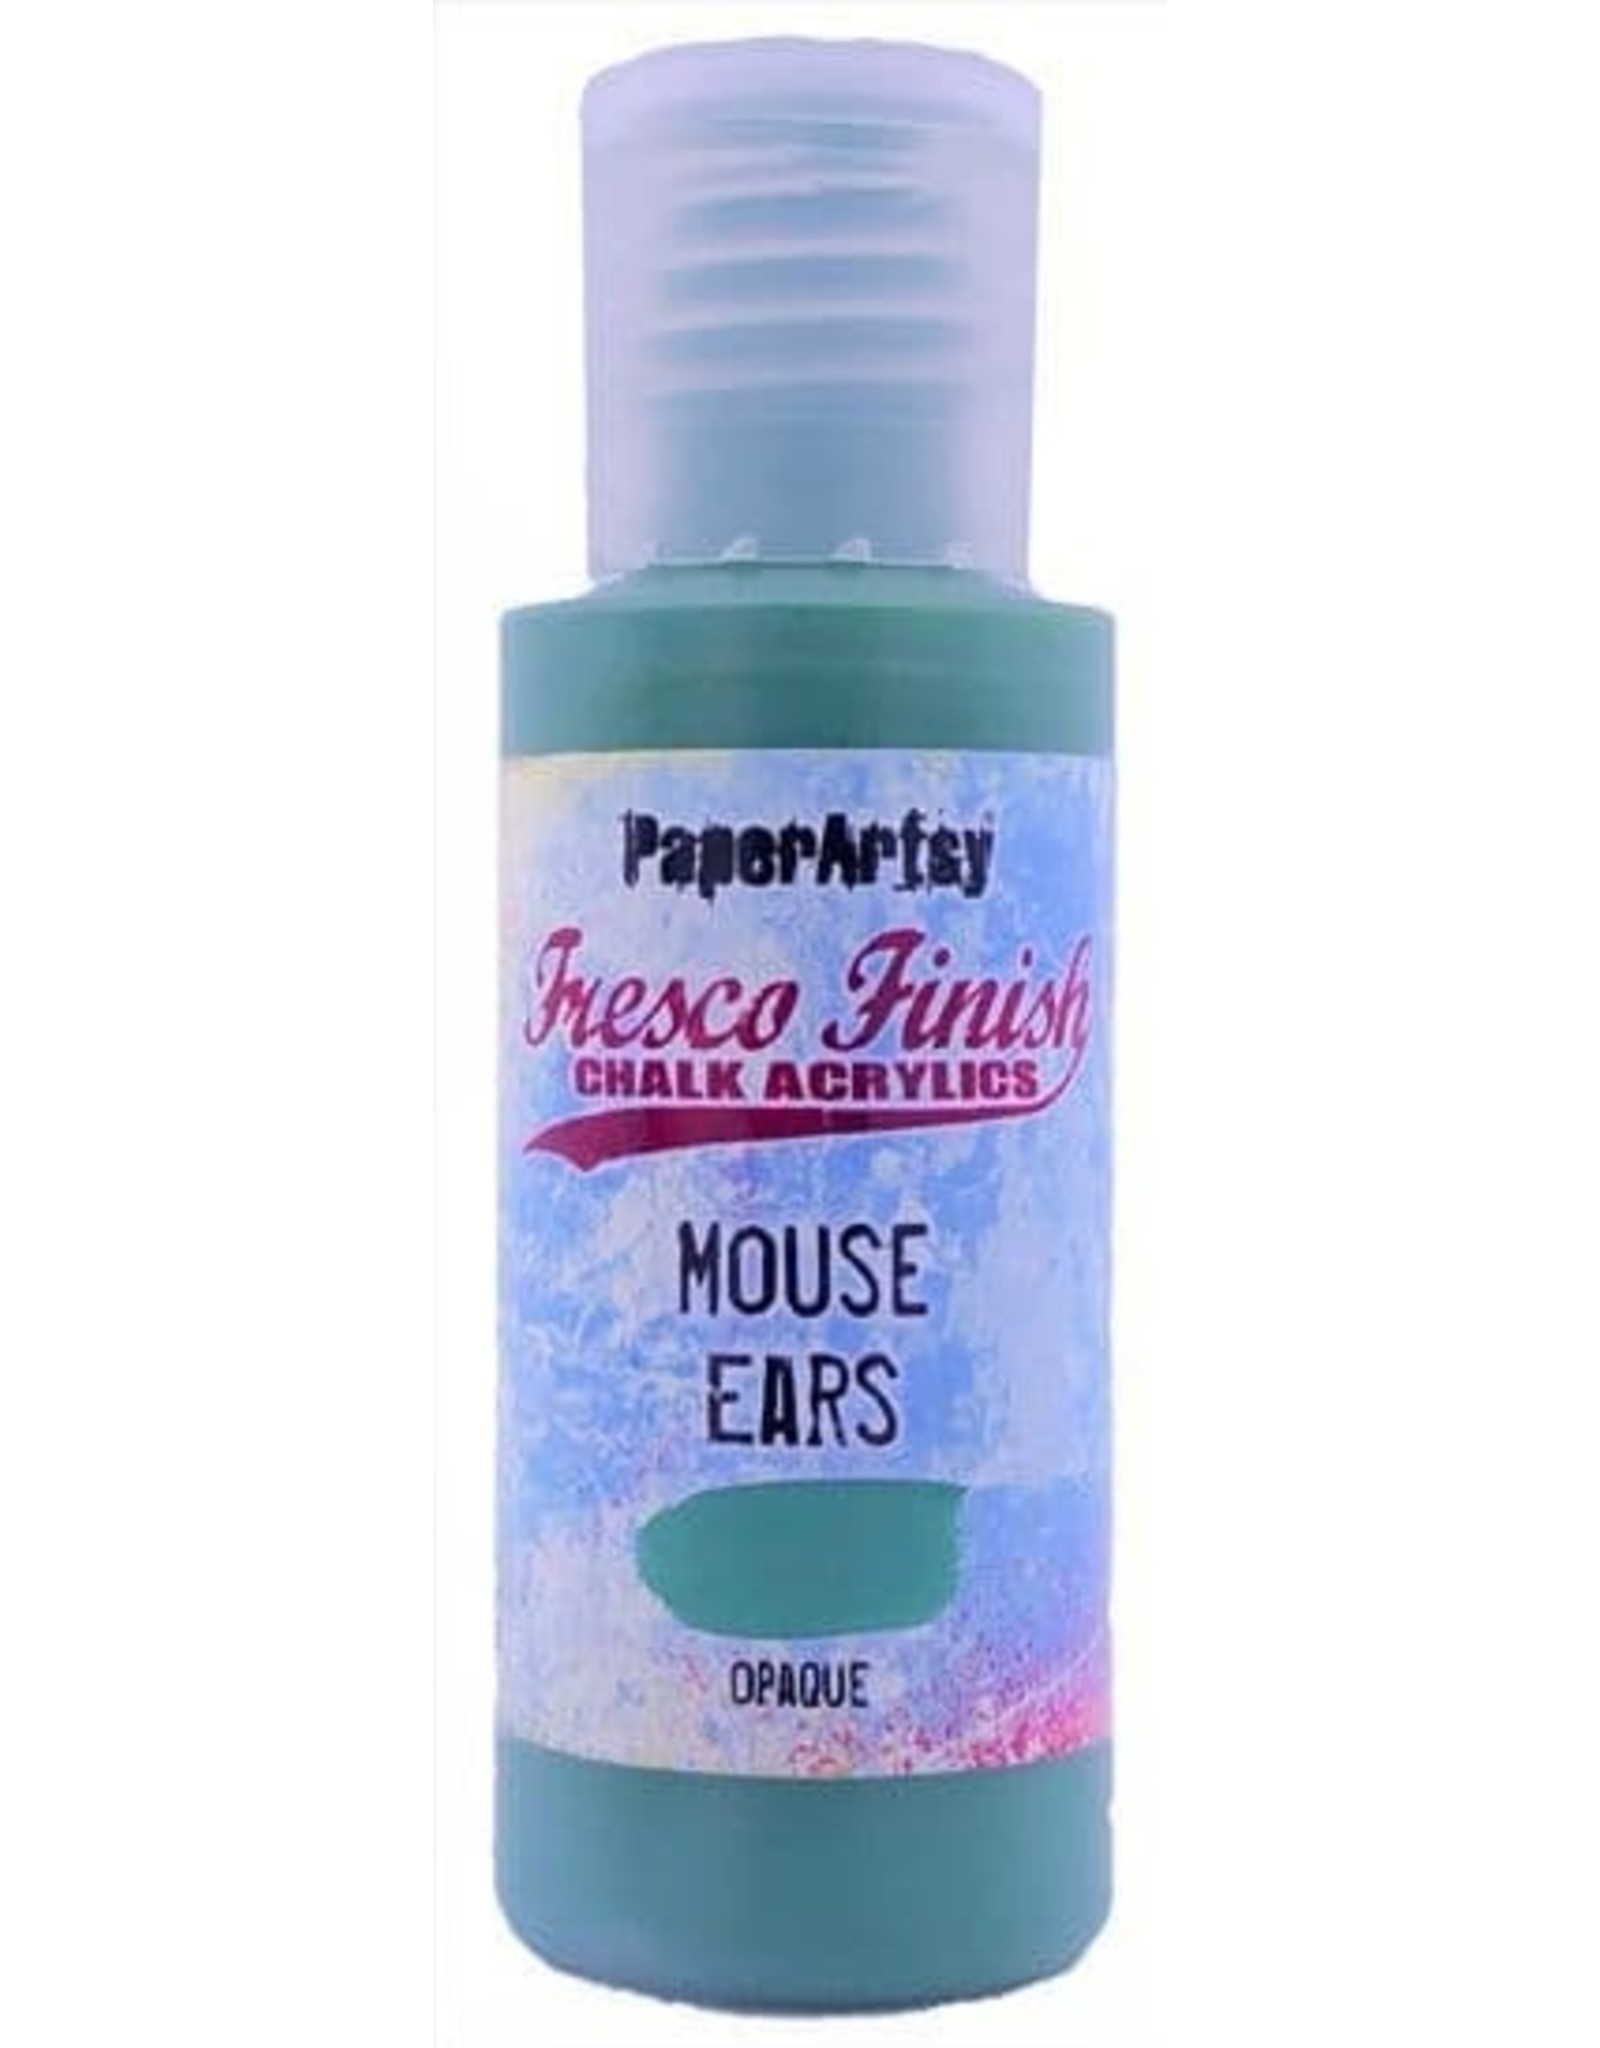 PAPER ARTSY PAPER ARTSY FRESCO FINISH MOUSE EARS OPAQUE ACRYLIC PAINT 50ML